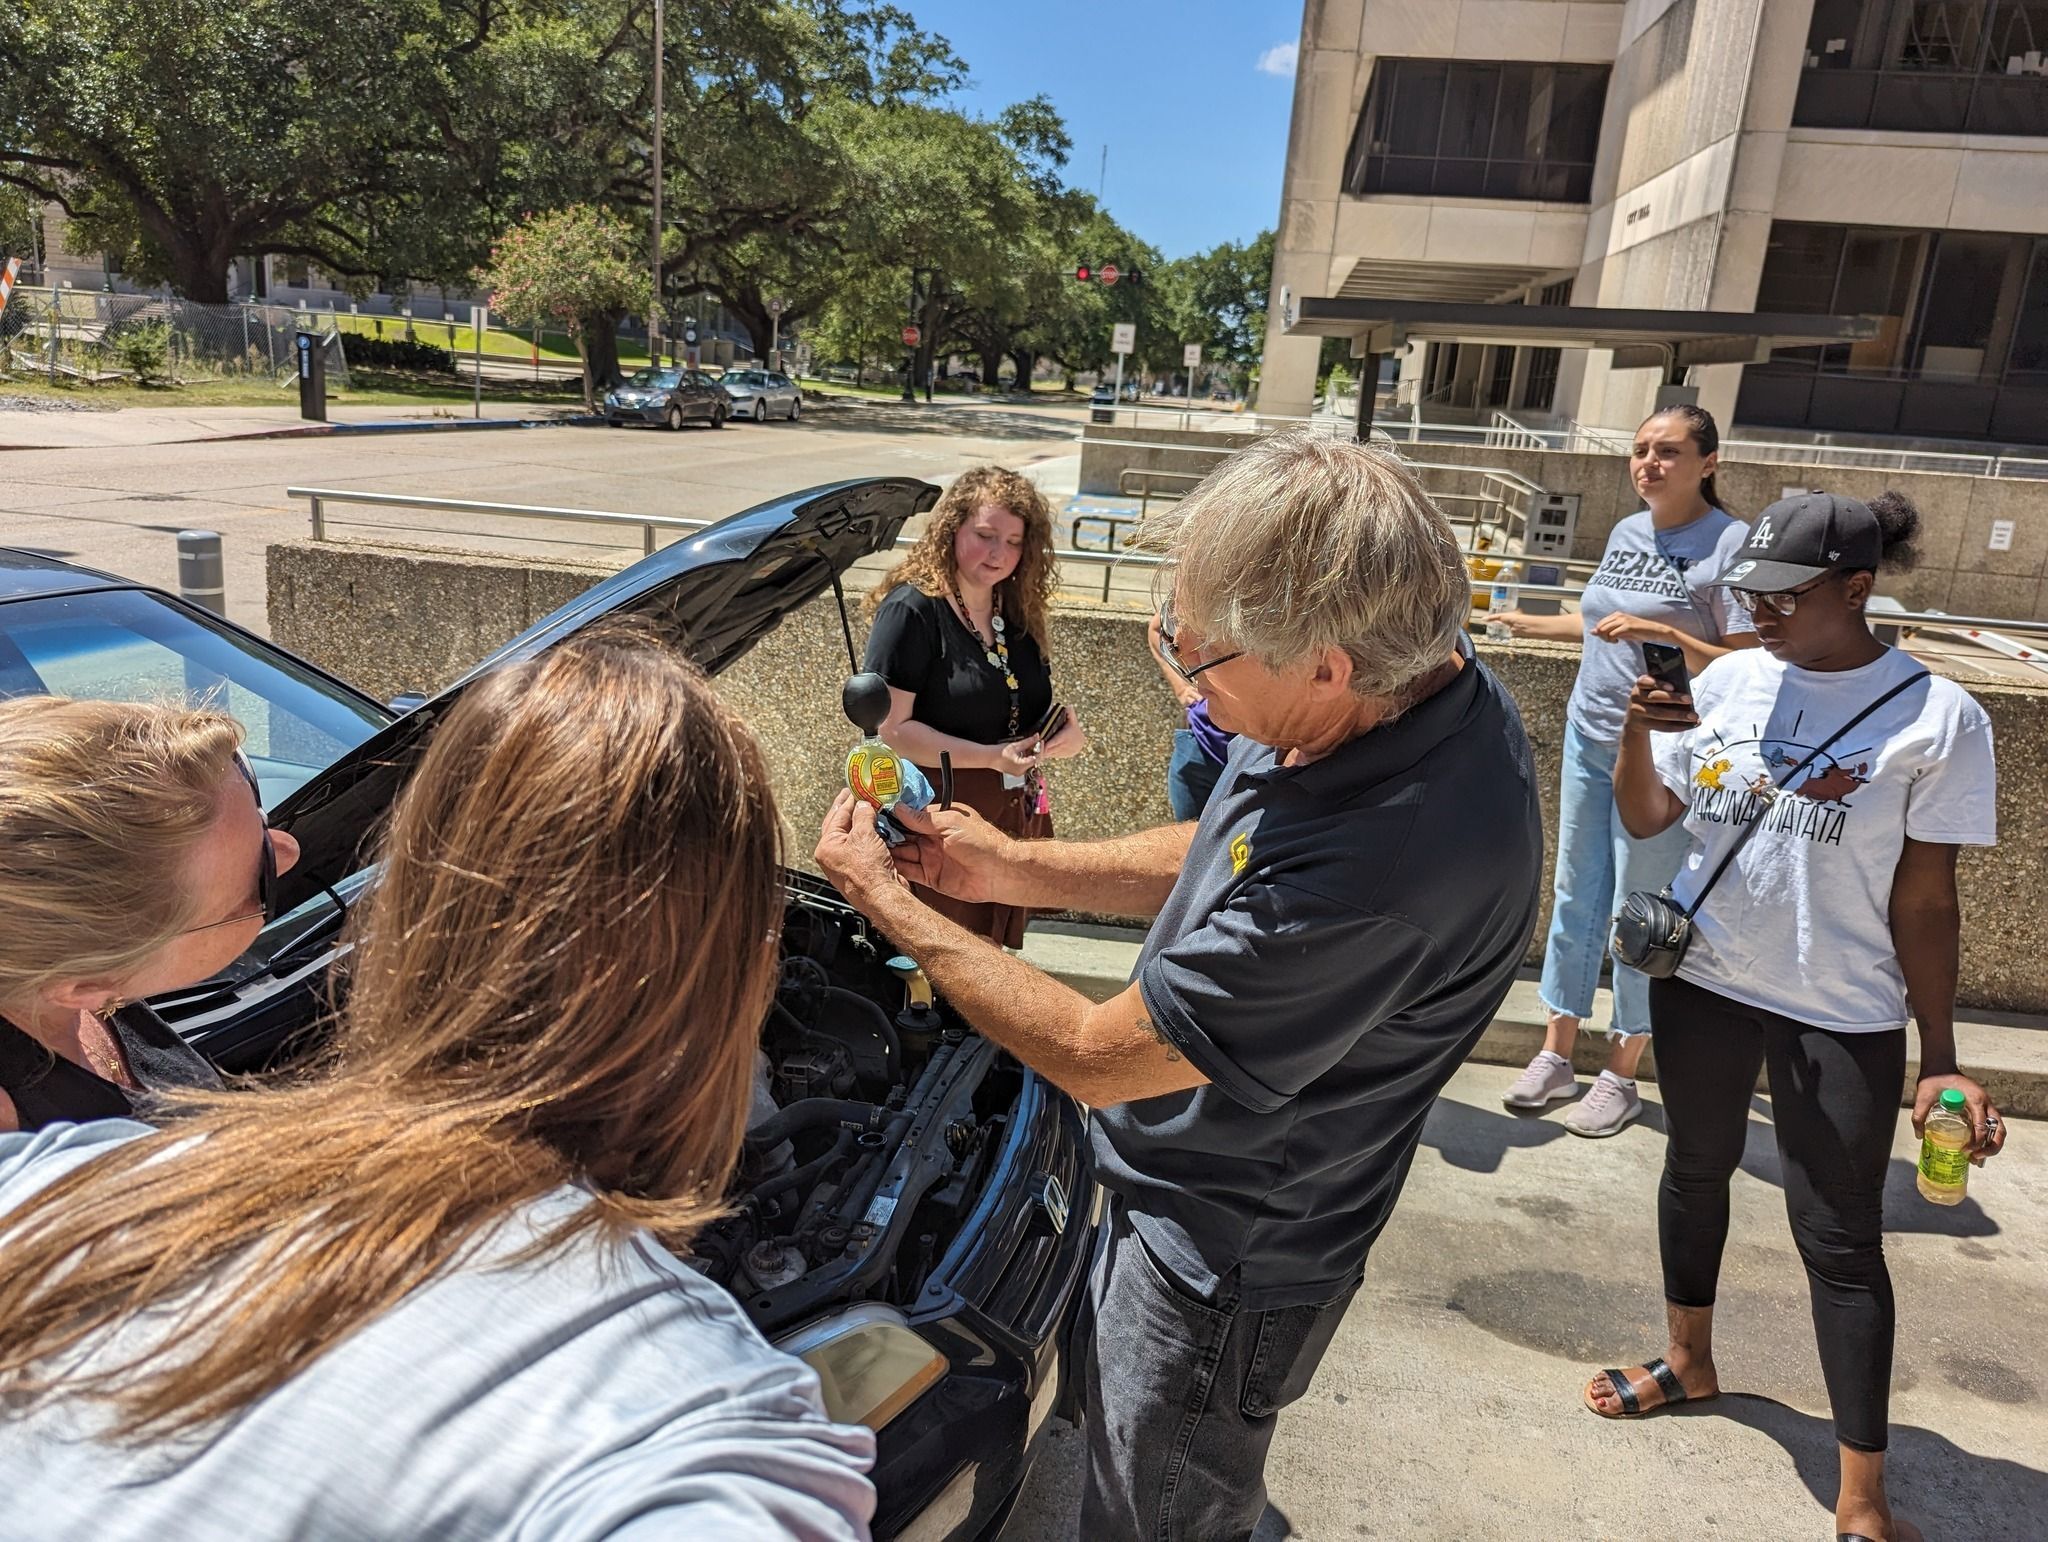  STEM librarian shows participants basic auto maintenance during the SPARK Your Summer series at the East Baton Rouge Parish Library.